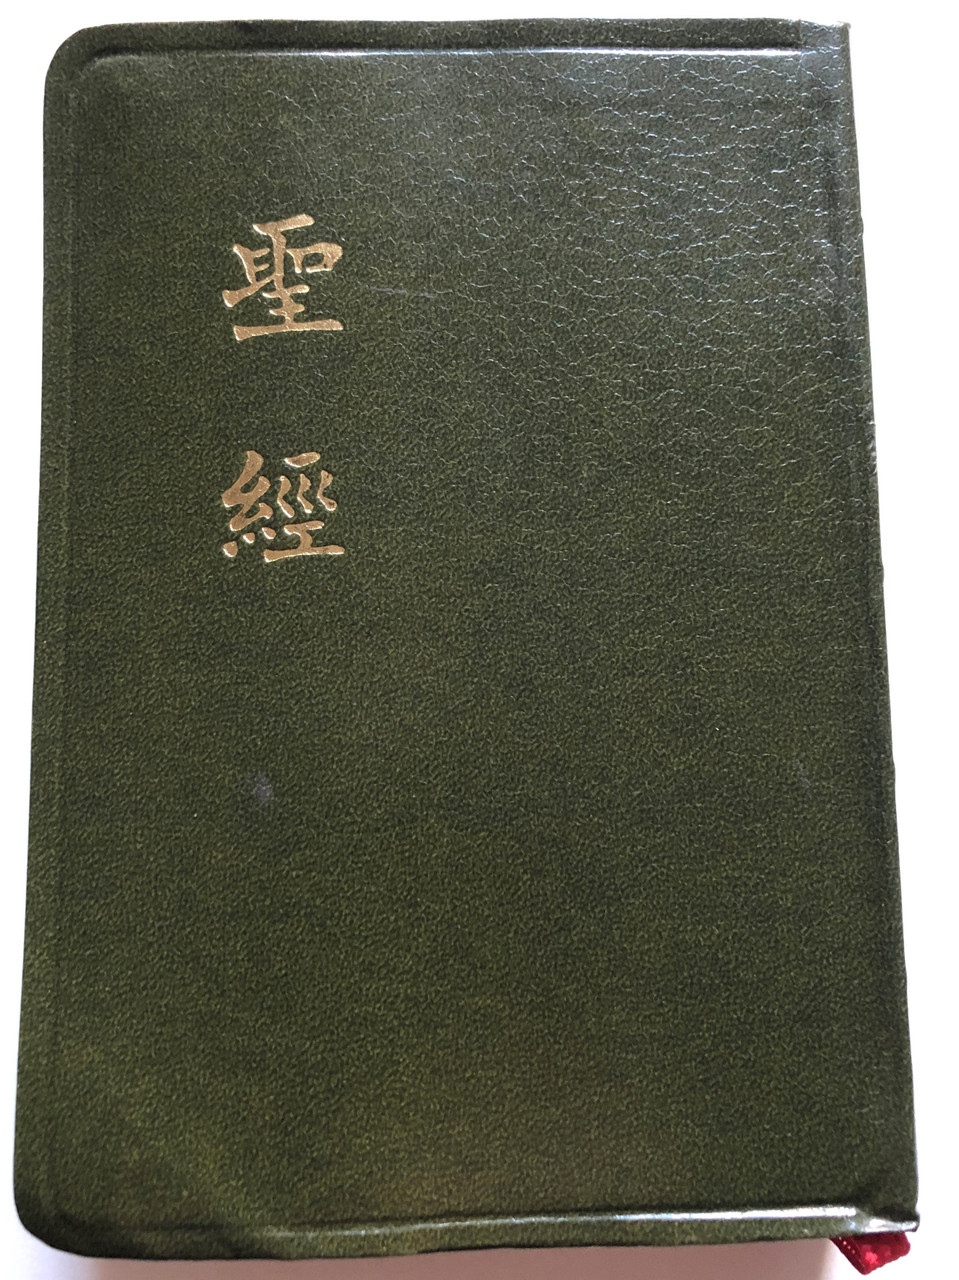 https://cdn10.bigcommerce.com/s-62bdpkt7pb/products/50545/images/257828/Chinese_Holy_Bible_Green_1__46883.1667637993.1280.1280.JPG?c=2